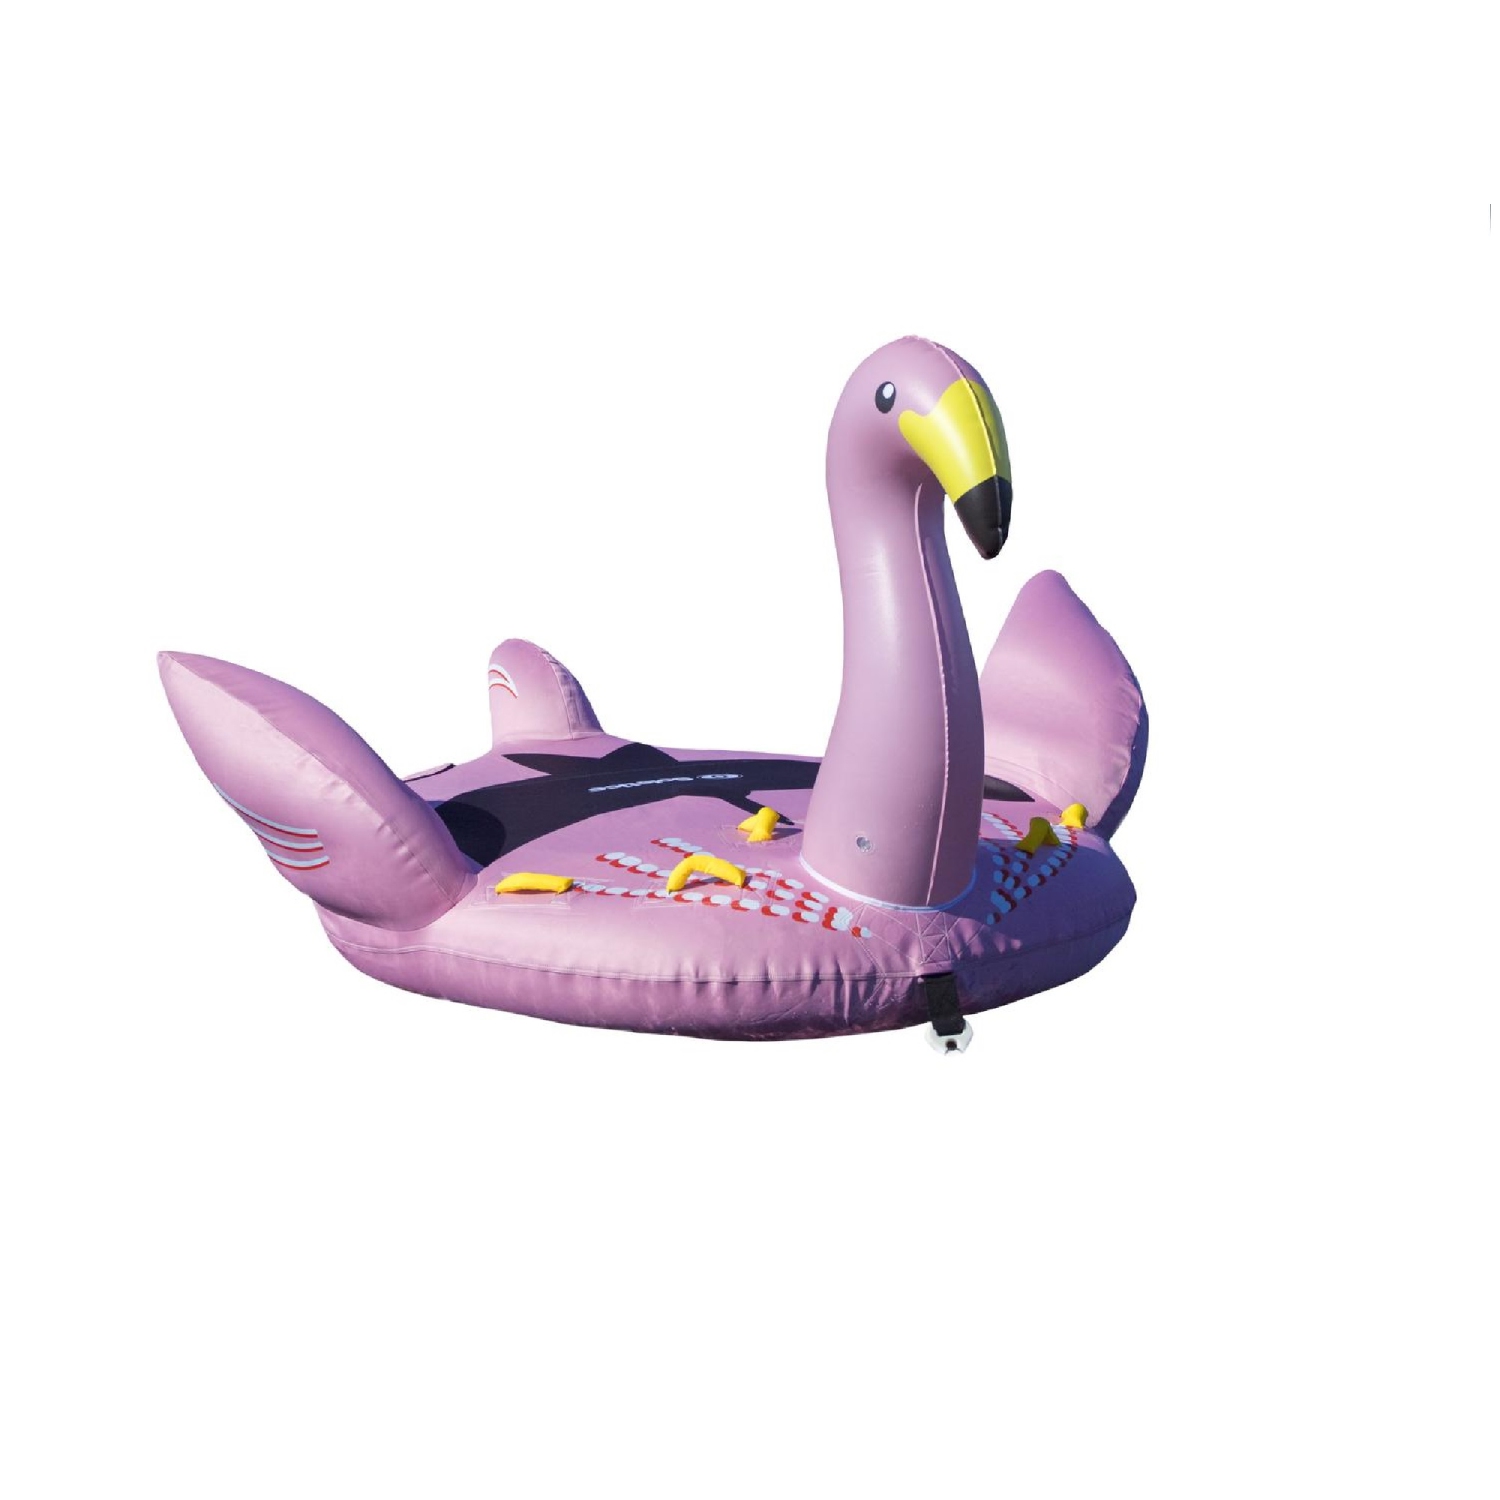 82" Pink and Yellow Inflatable Lay-on Towable Flamingo Float